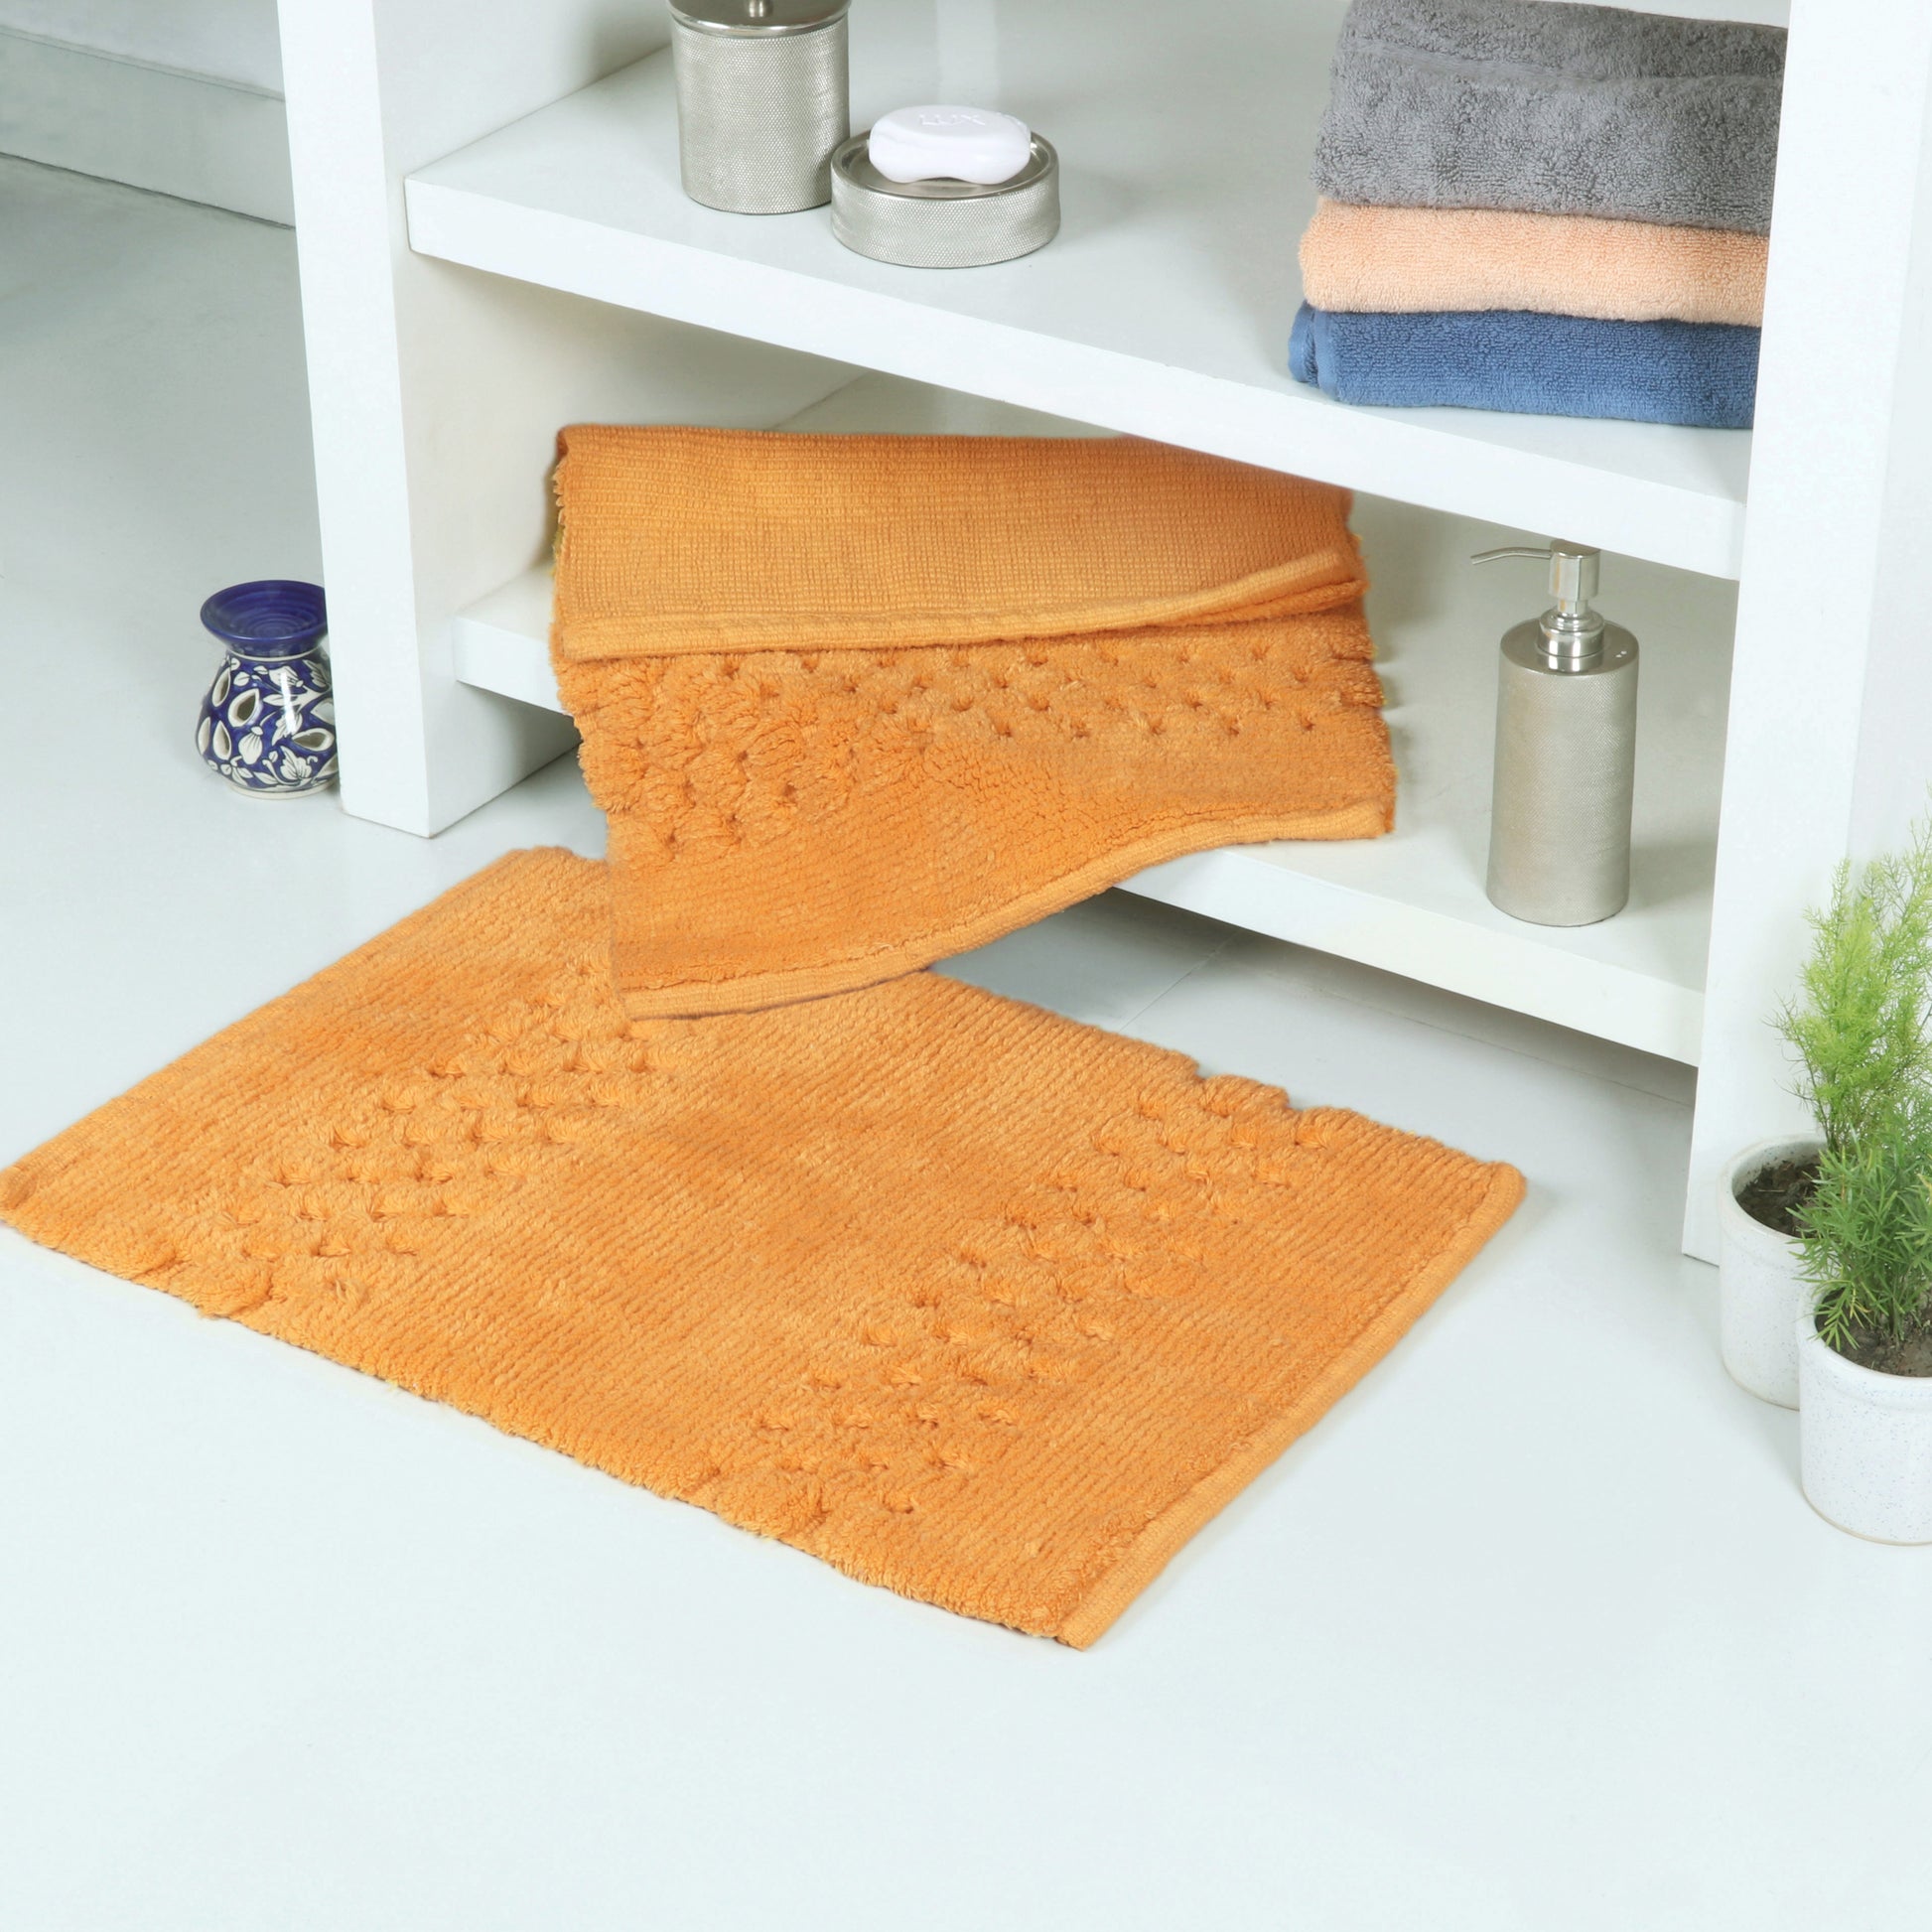 Combo Deal-Terry Towel 6 pc set and Honeycomb Bath rug 17x24/21x34 - TreeWool Bundle Deal#color_mustard